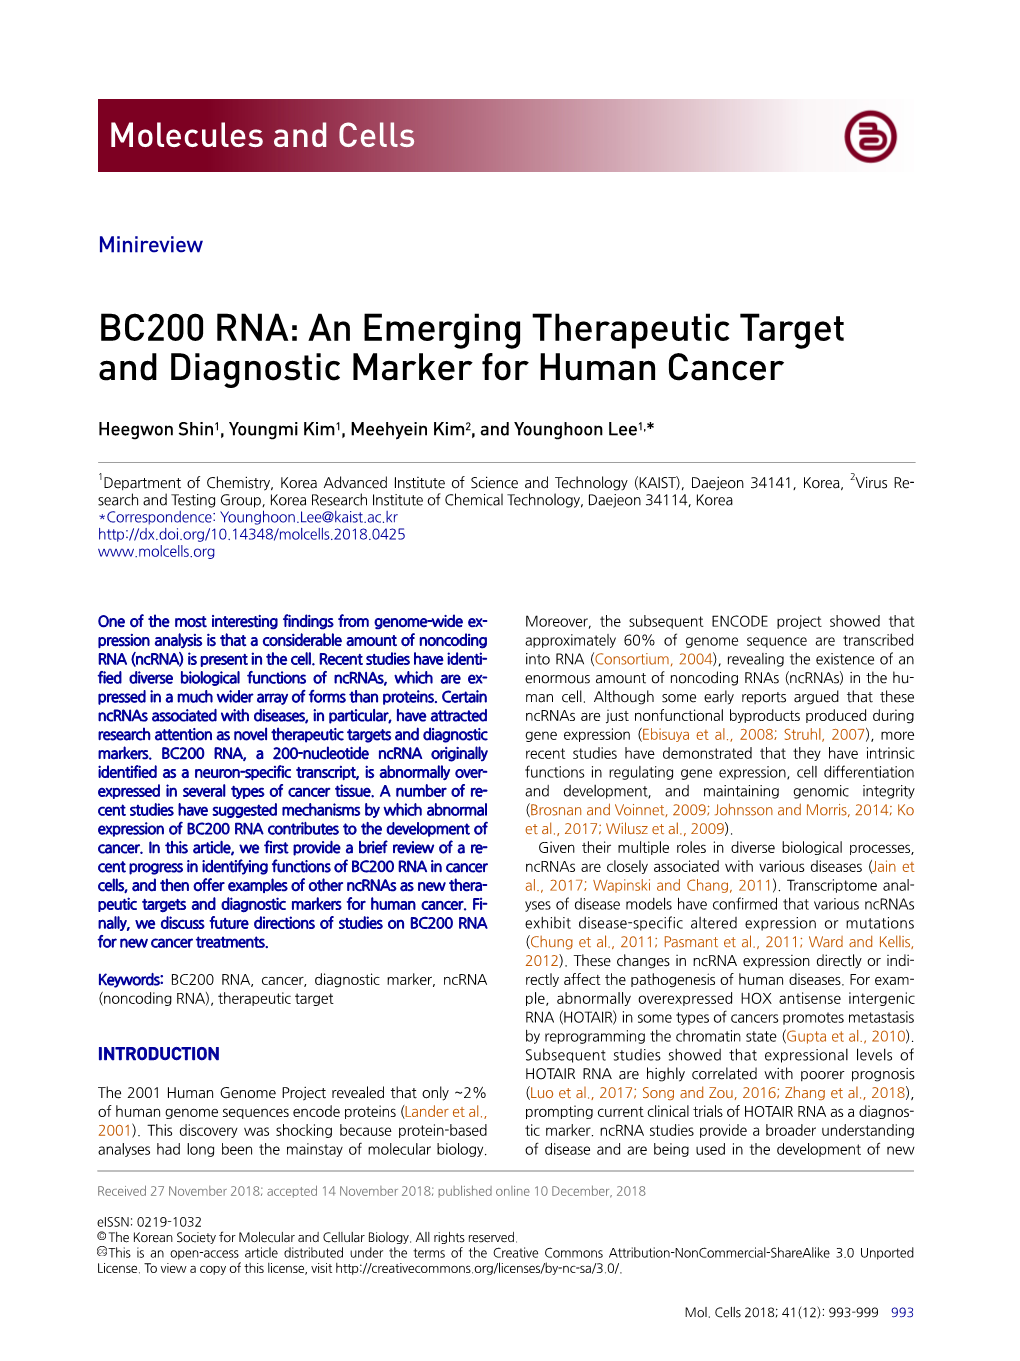 BC200 RNA: an Emerging Therapeutic Target and Diagnostic Marker for Human Cancer